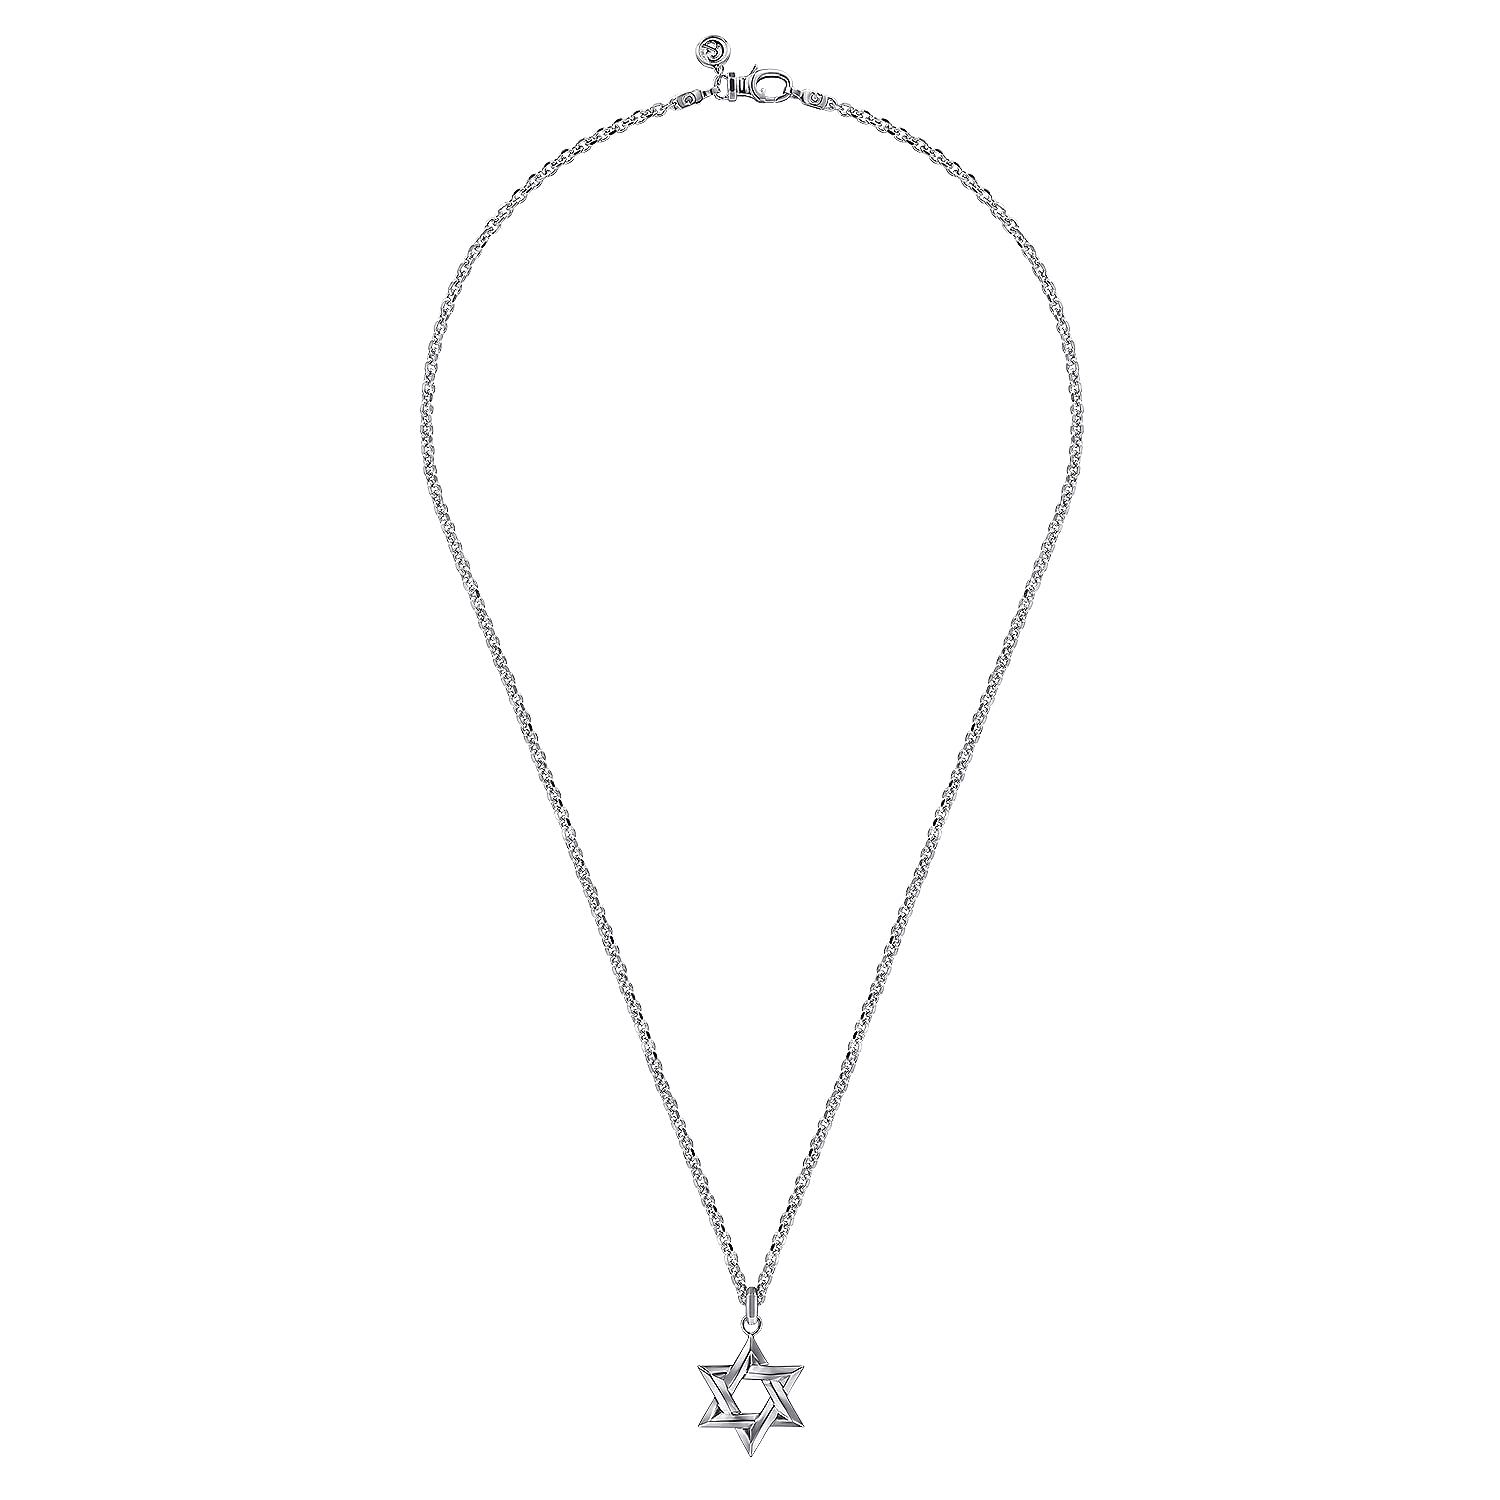 22 Inch 925 Sterling Silver Star of David Link Chain Necklace